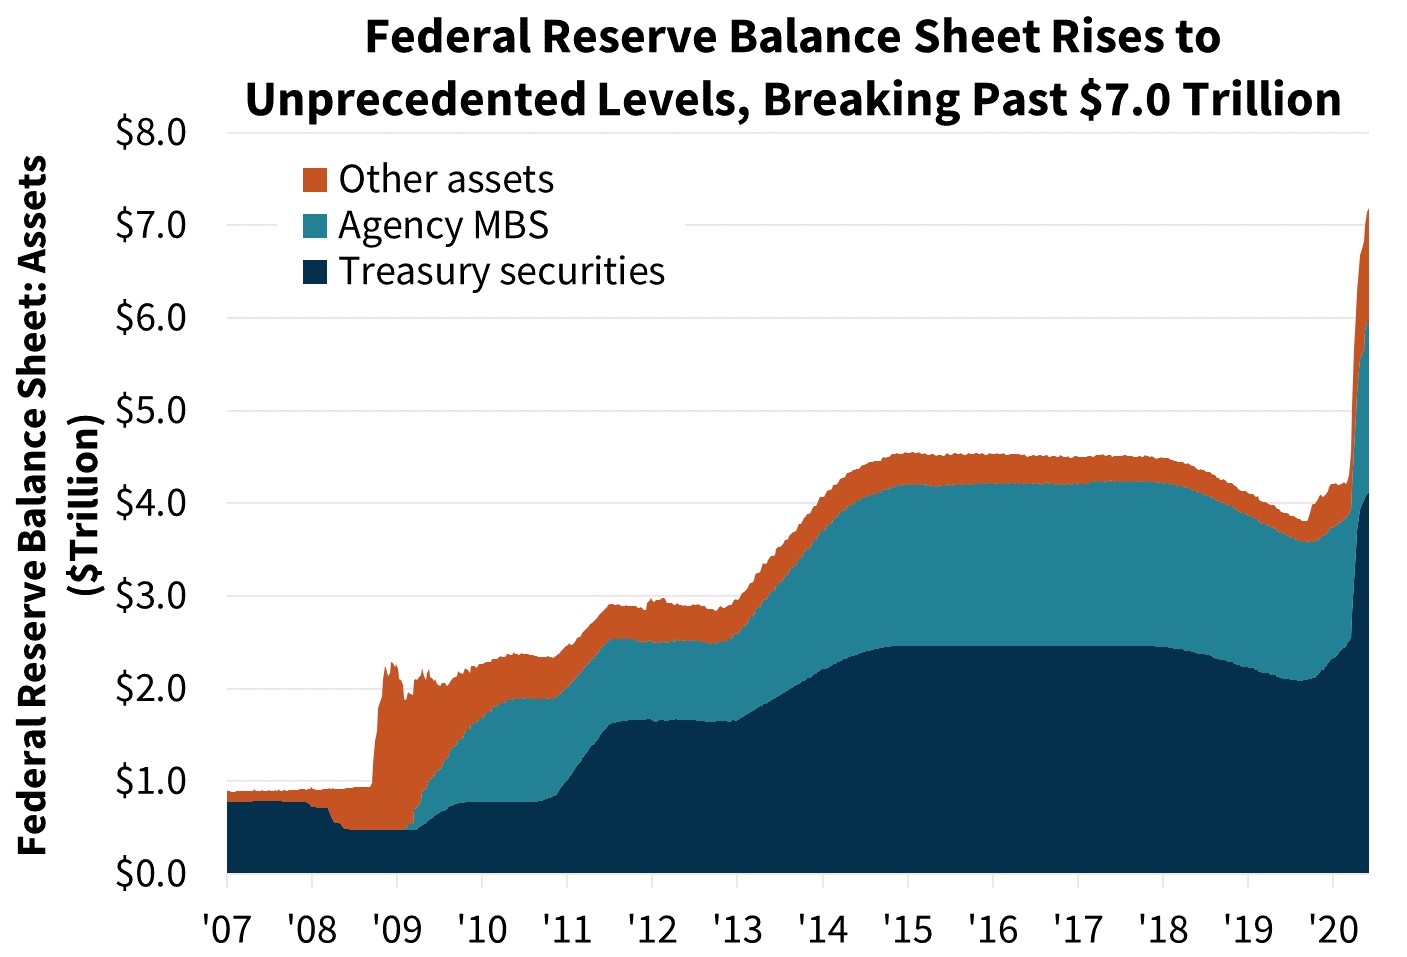  Federal Reserve Balance Sheet Rises to Unprecedented Levels, Breaking Past $7.0 Trillion